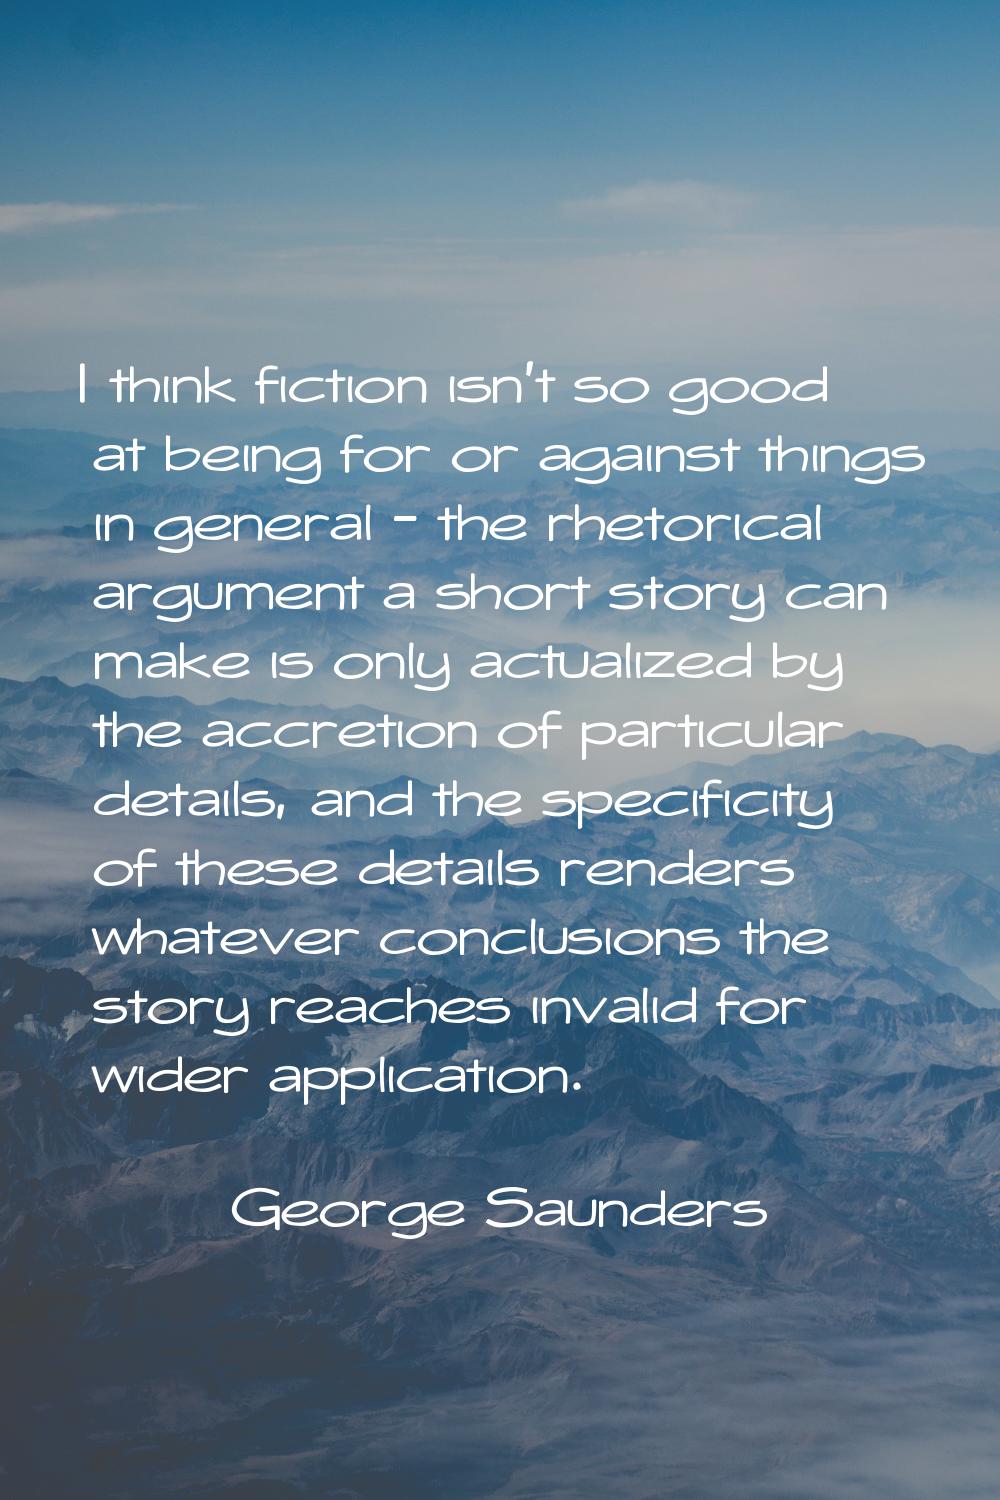 I think fiction isn't so good at being for or against things in general - the rhetorical argument a